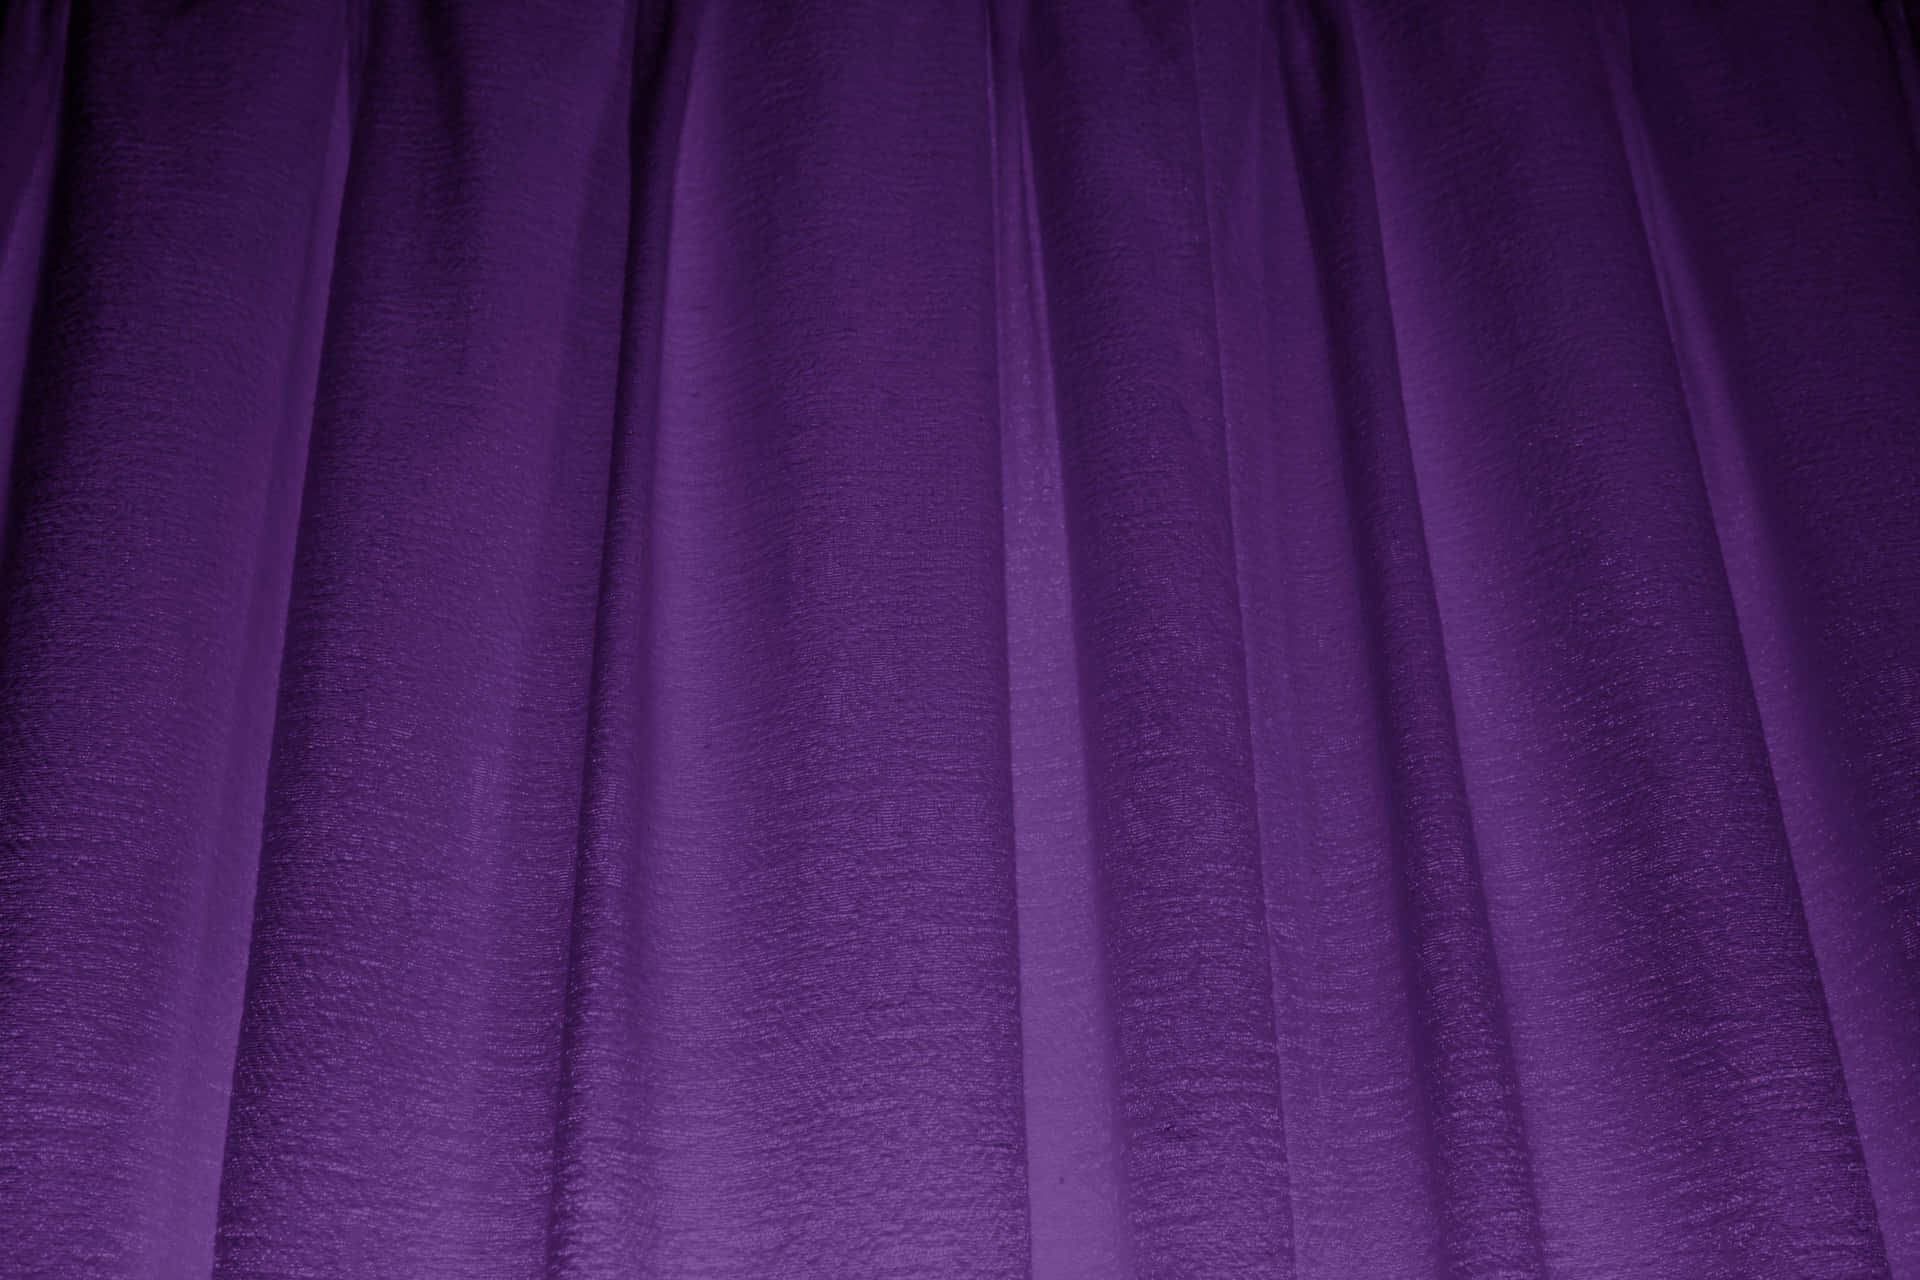 Adorn Your Windows With Elegant Purple Curtains Wallpaper